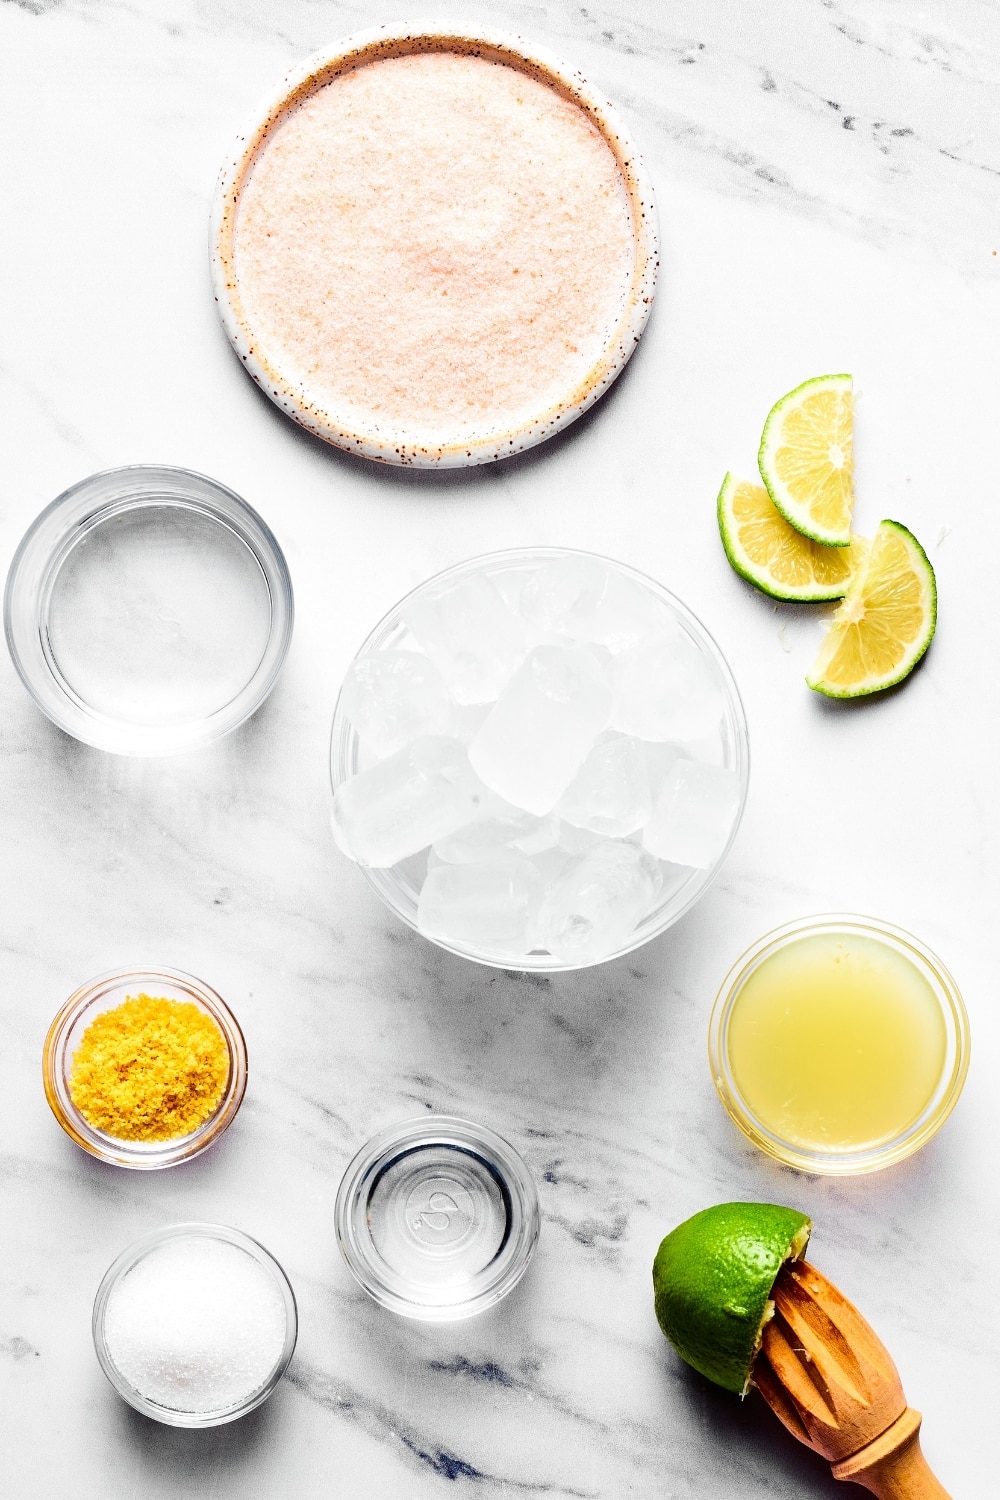 Keto margarita ingredients on a white counter. There is a small bowl of erythritol, small bowl of orange zest, a small cup of tequila, a bowl of ice, a small cup of water, if you wind wedges, and a plate of salt.